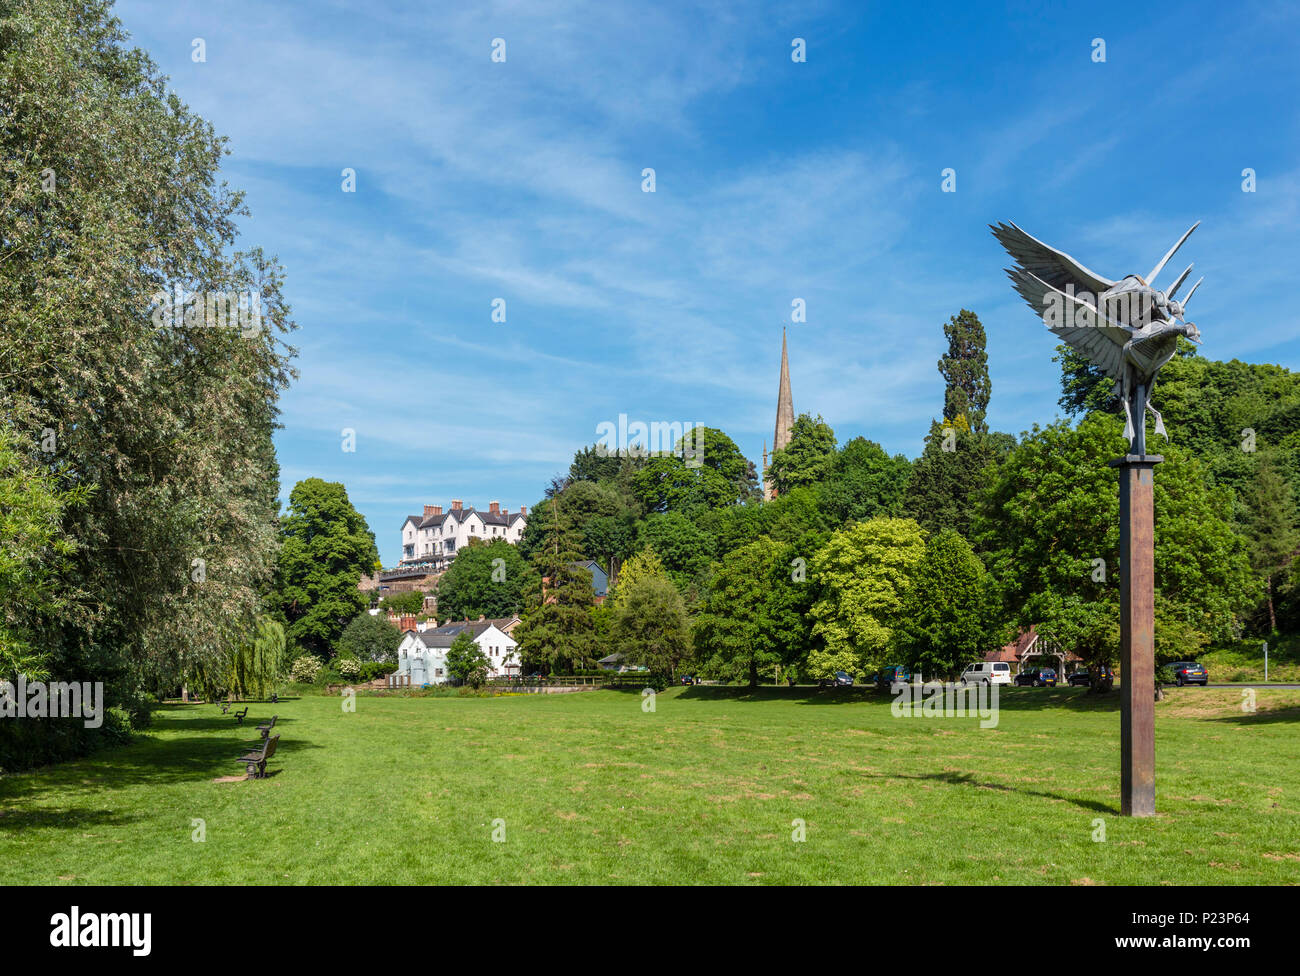 View of the town from the River Walk, Ross-on-Wye, Herefordshire, England, UK Stock Photo